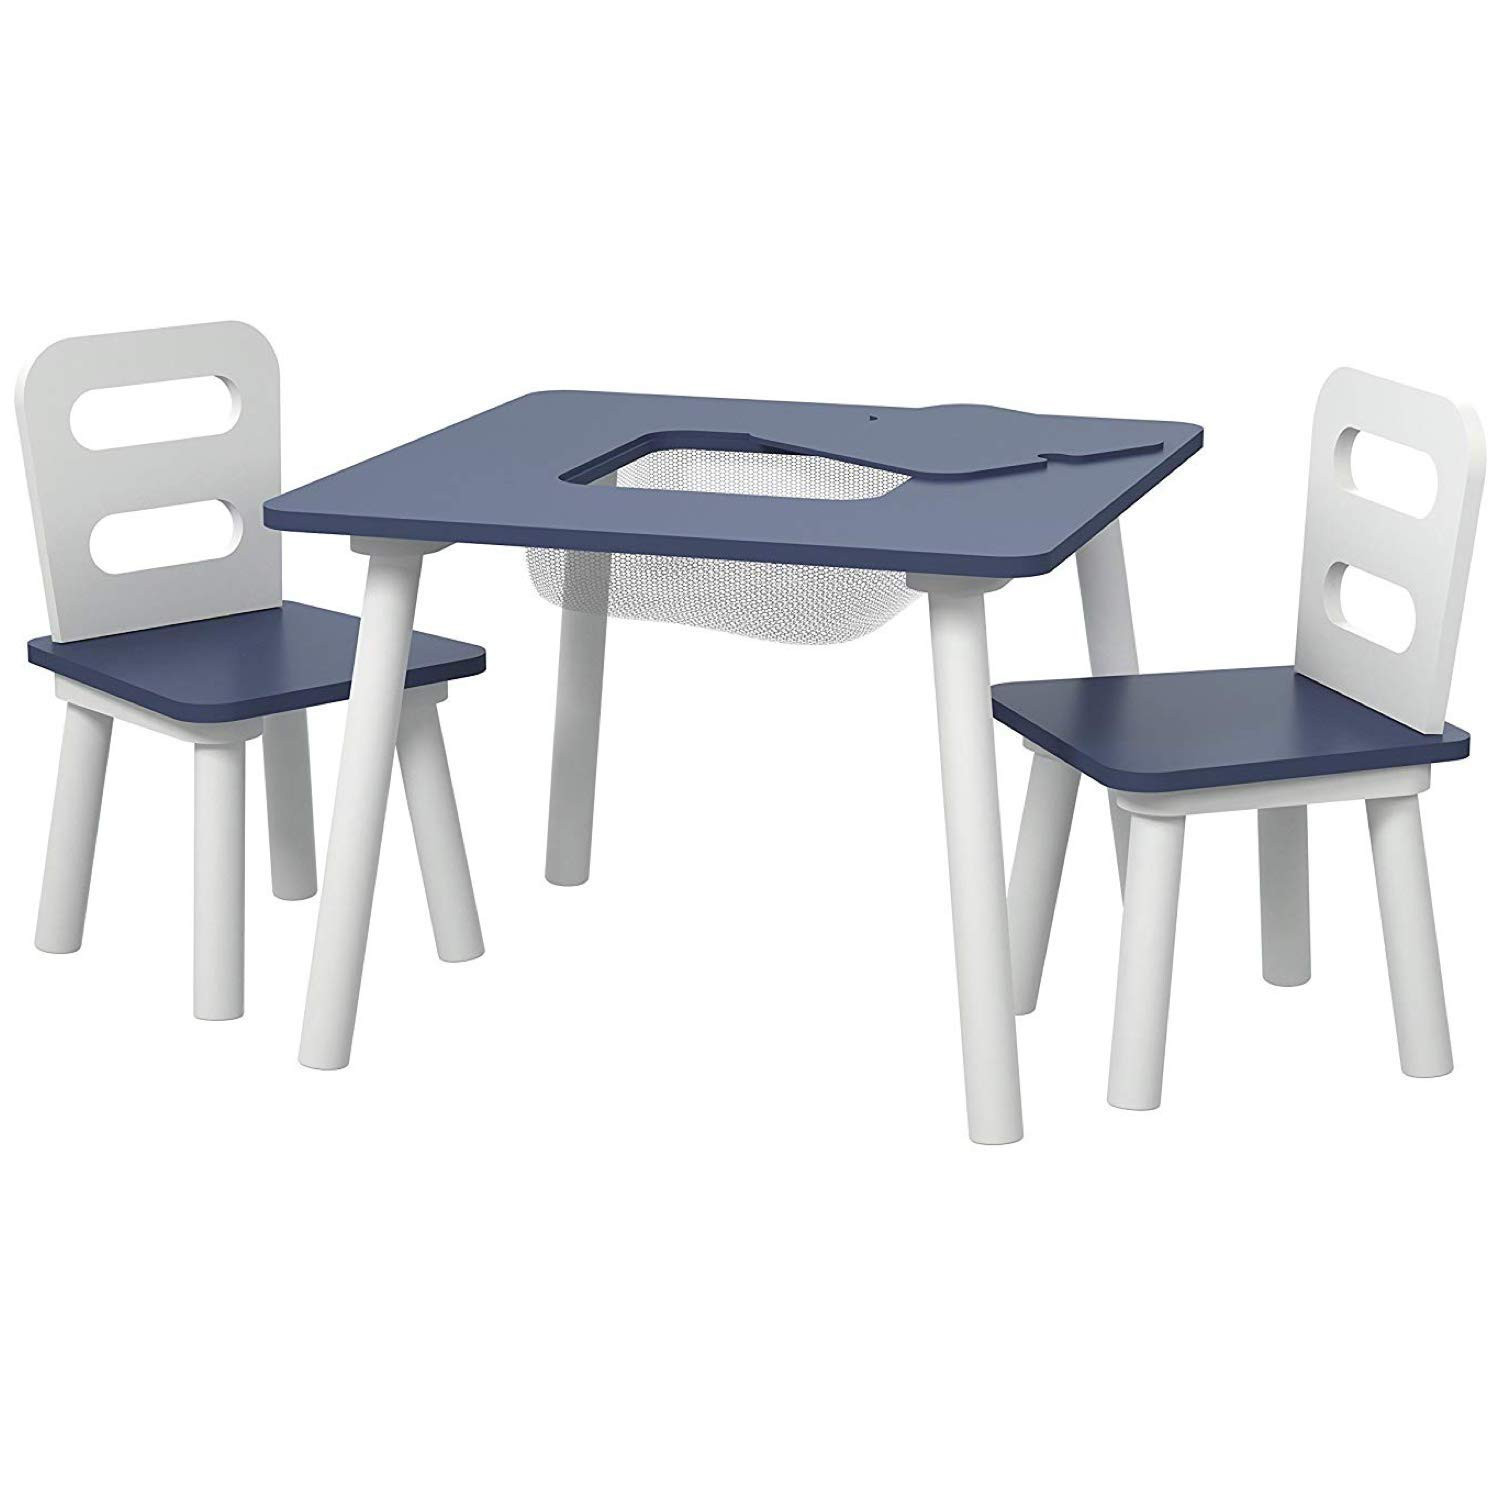 Walmart Kids Table Set
 Pidoko Kids Table and Chairs Set with Storage Blue White